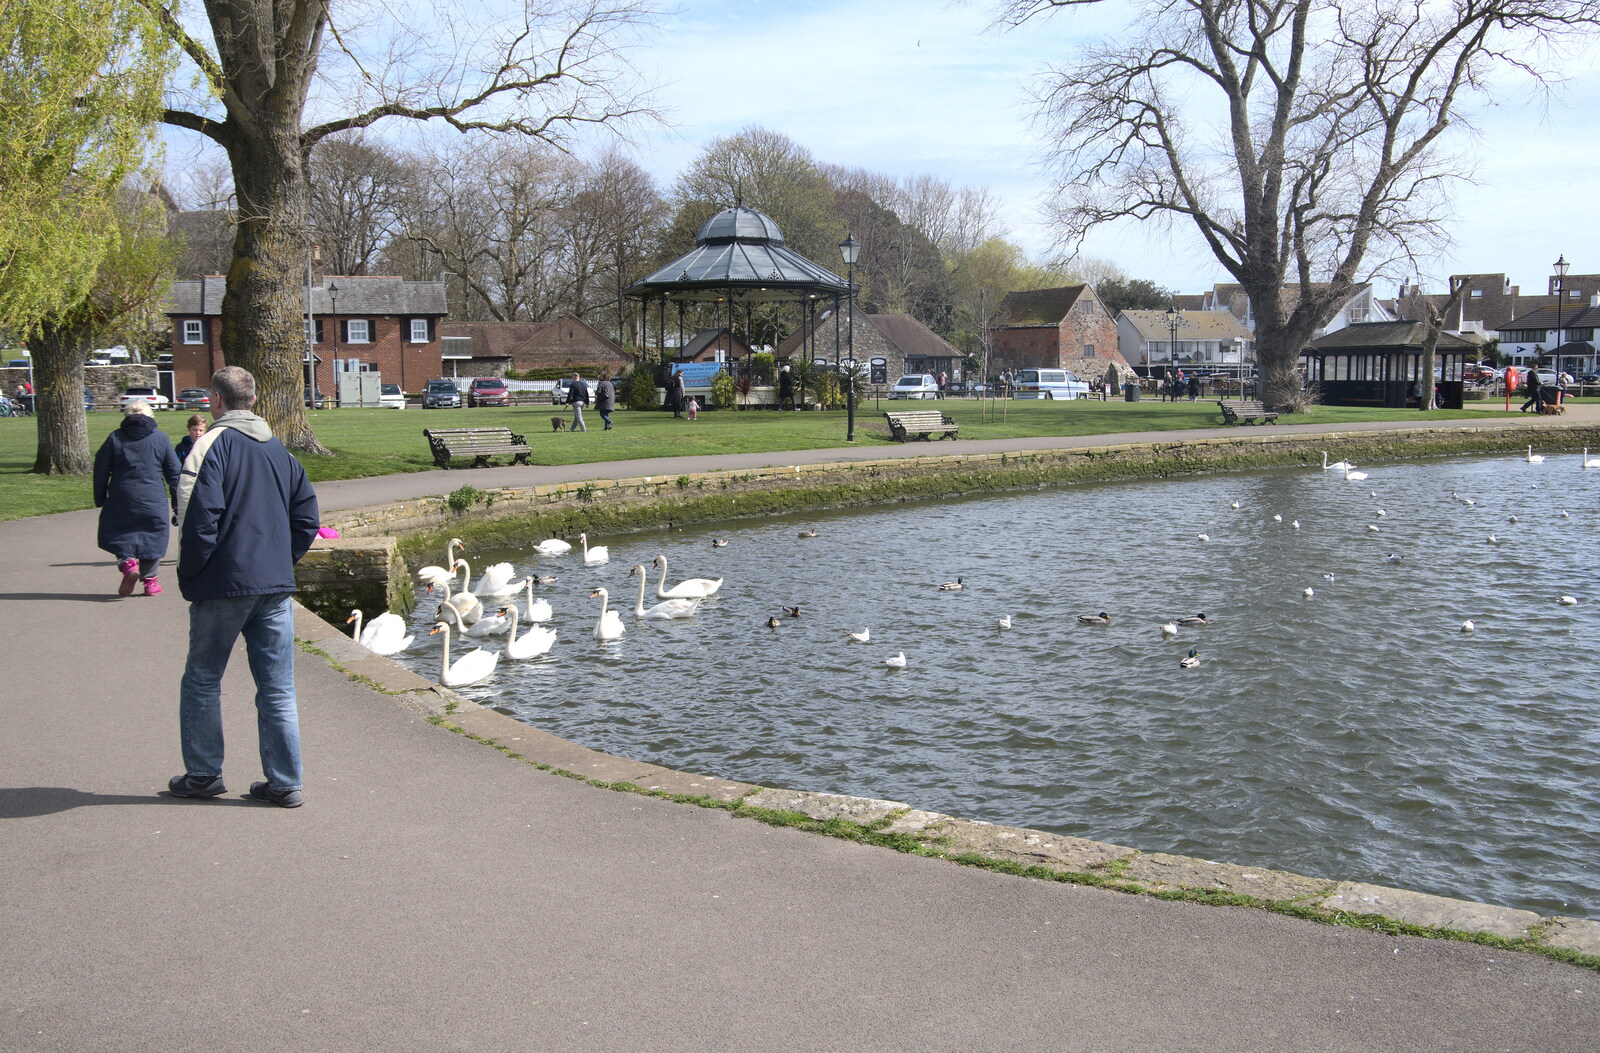 Bernice's Birthday and Walks Around New Milton and Lymington, Hampshire - 10th April 2022: Swans and the bandstand